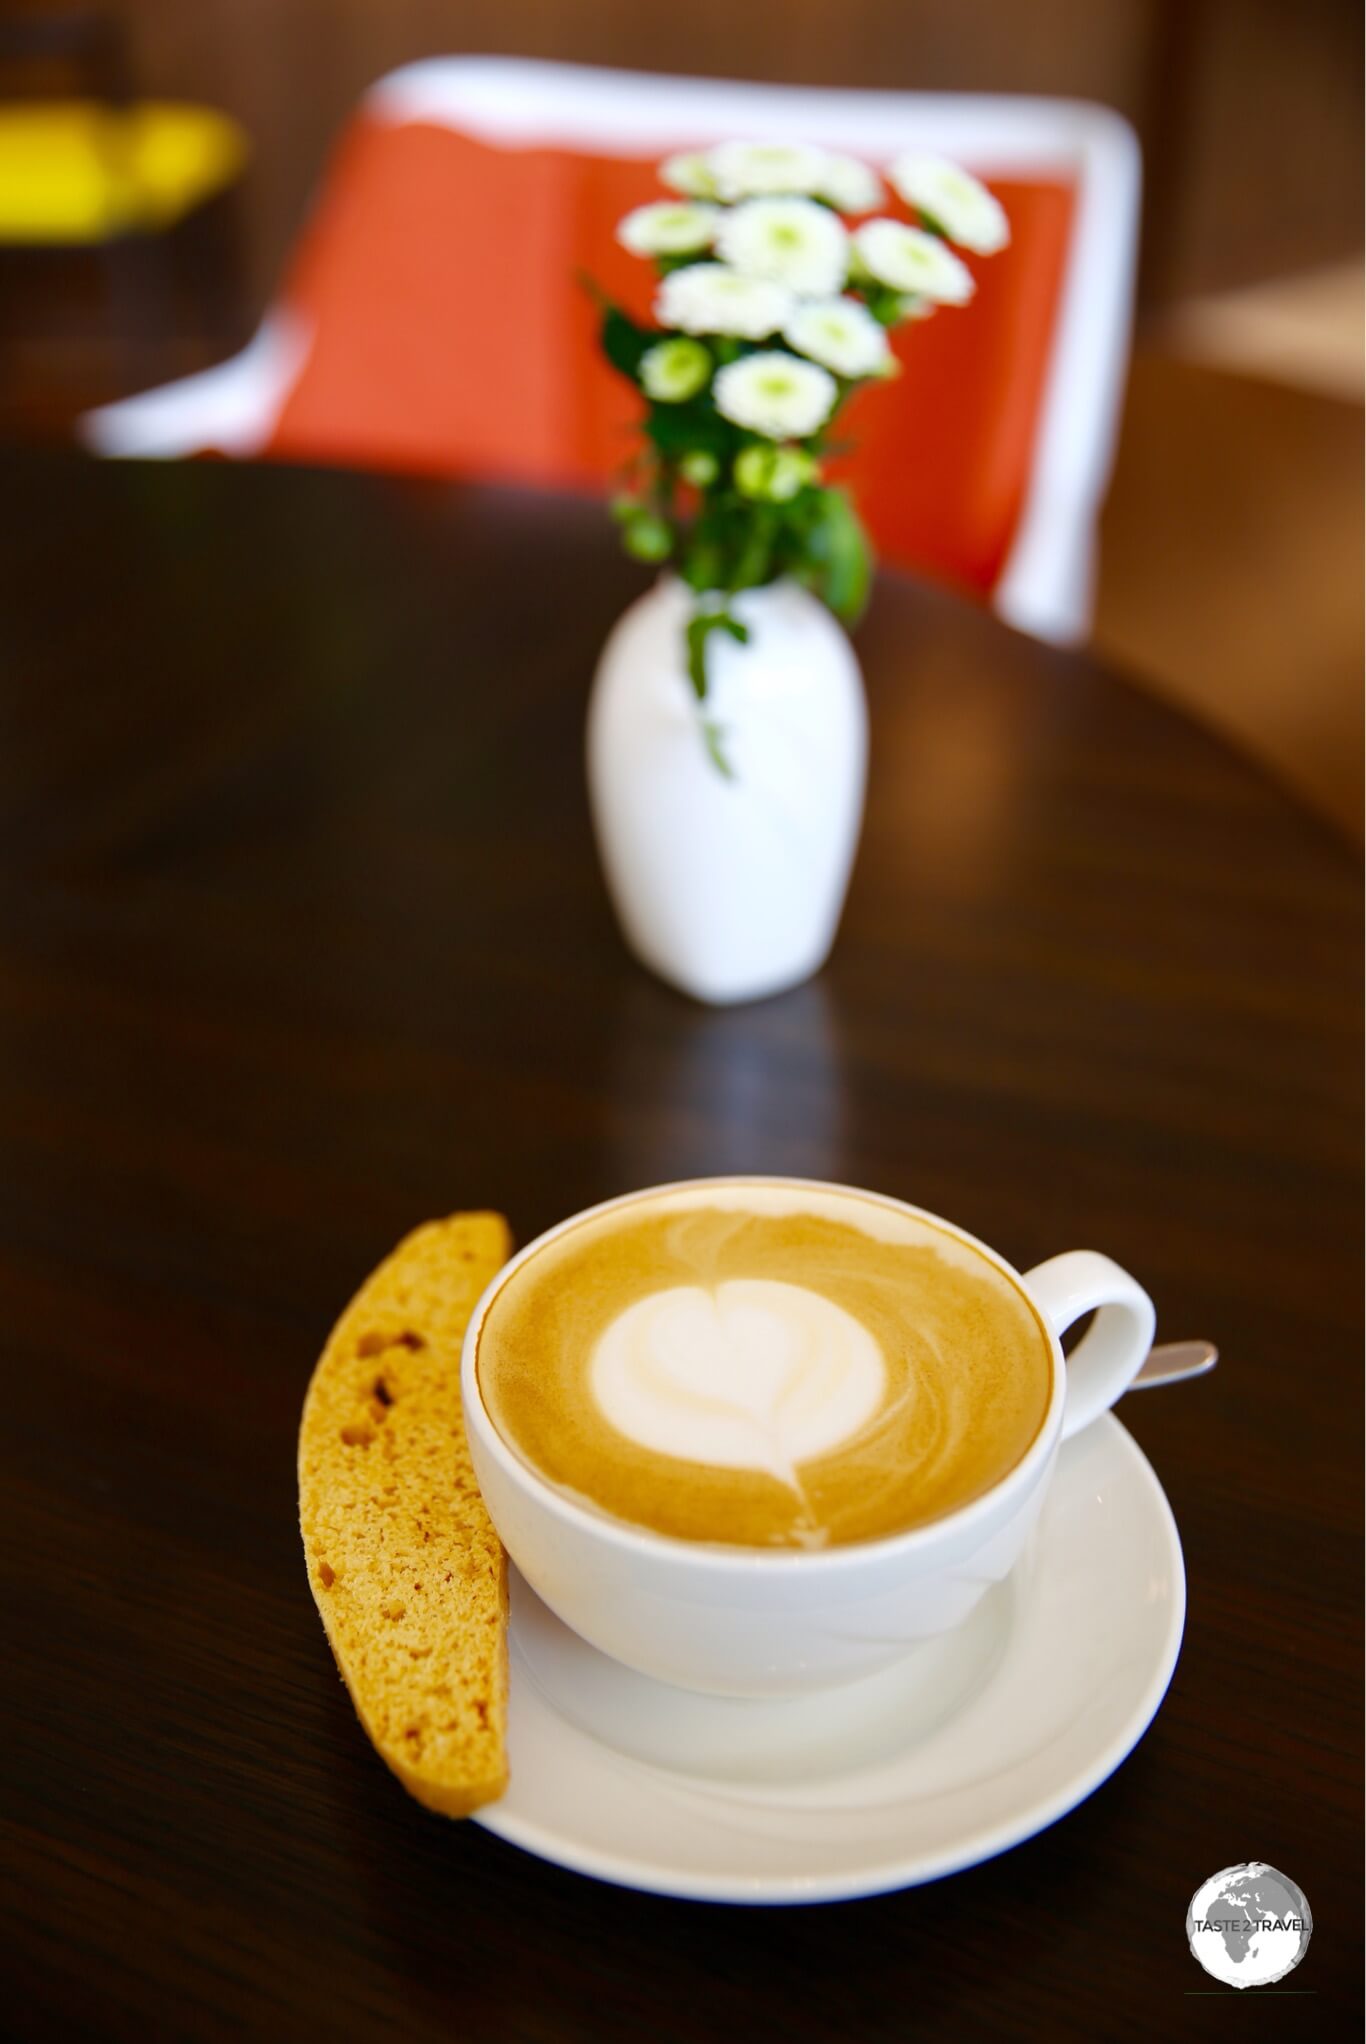 A coffee at the upscale Cafe Social, at the Hotel Intercontinental, costs Tk 400 (US$4.70). 